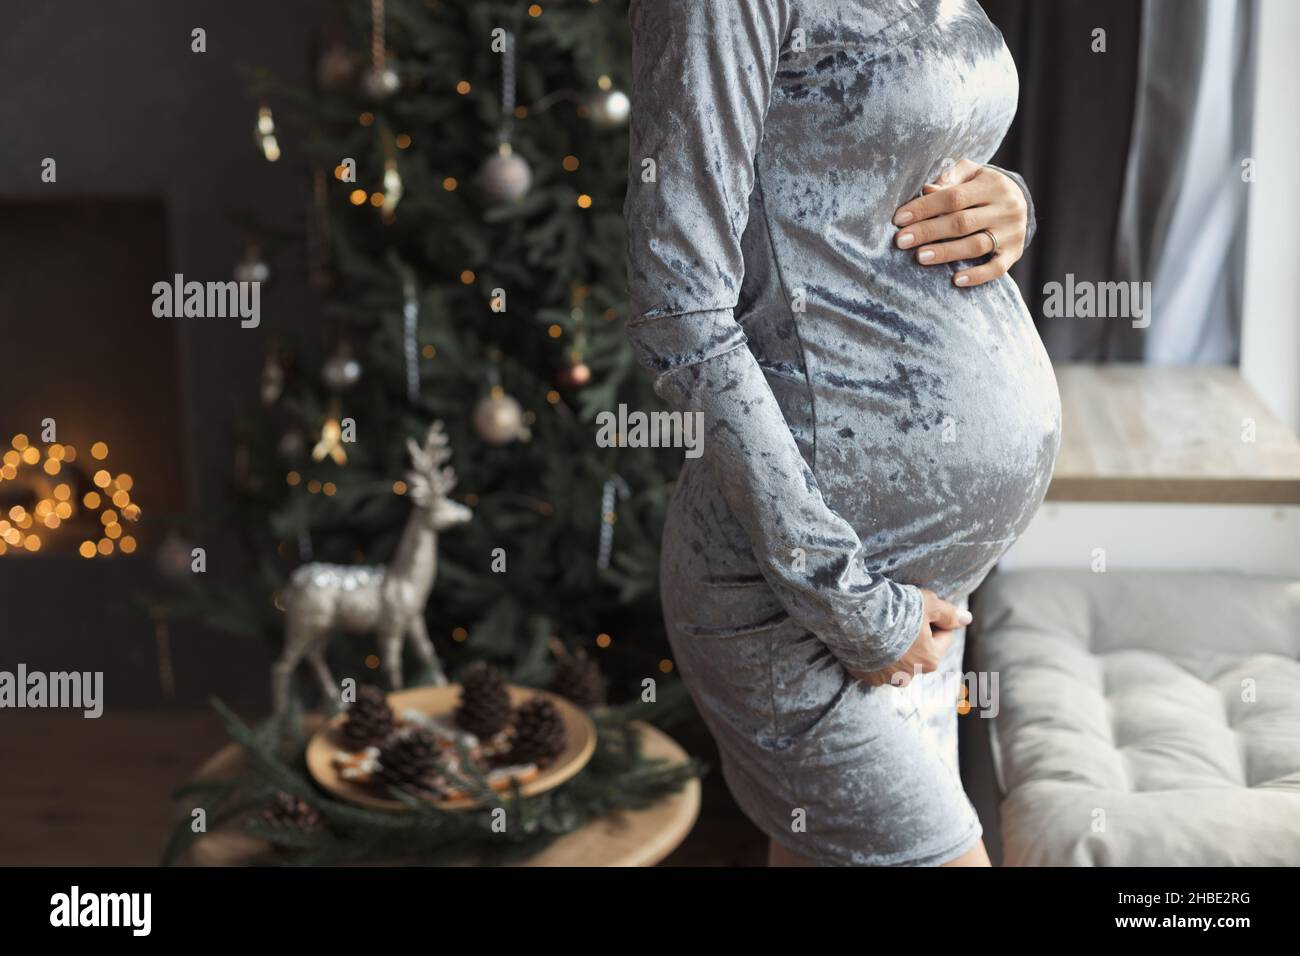 Faceless womans pregnant belly in velvet grey evening dress closeup in cozy home interior on Christmas tree background Stock Photo